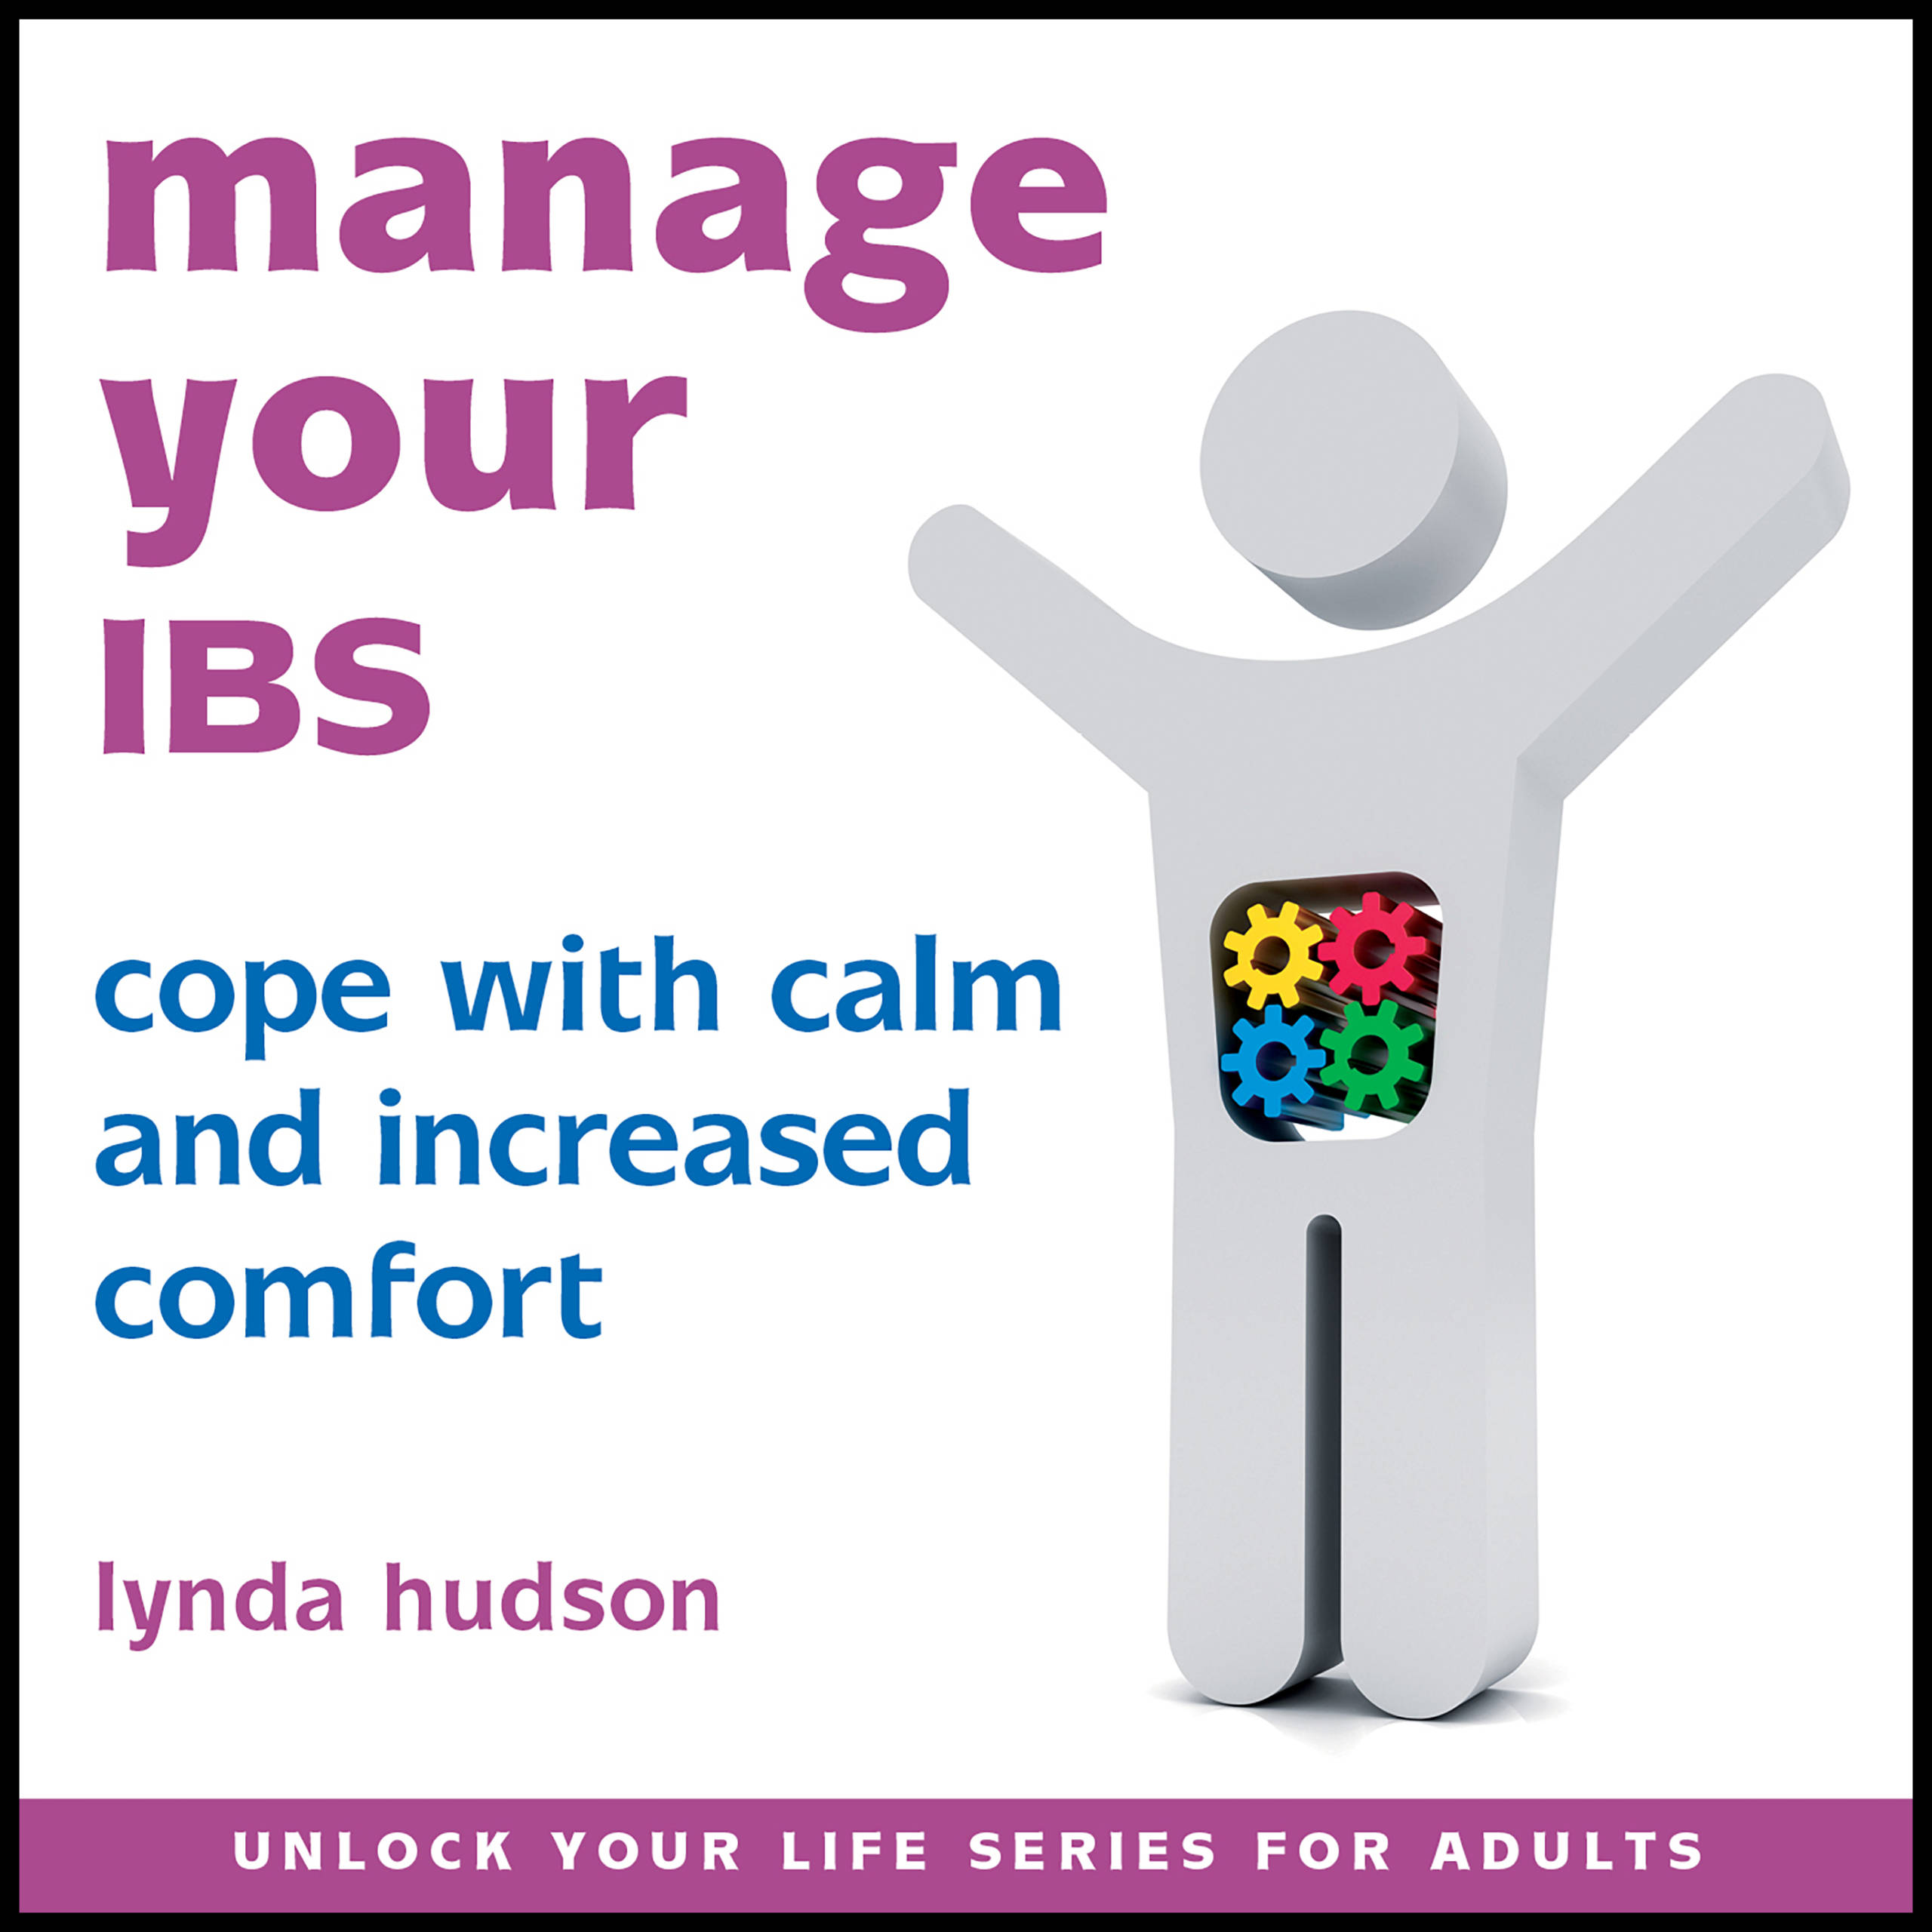 Manage your IBS (Irritable Bowel Syndrome)